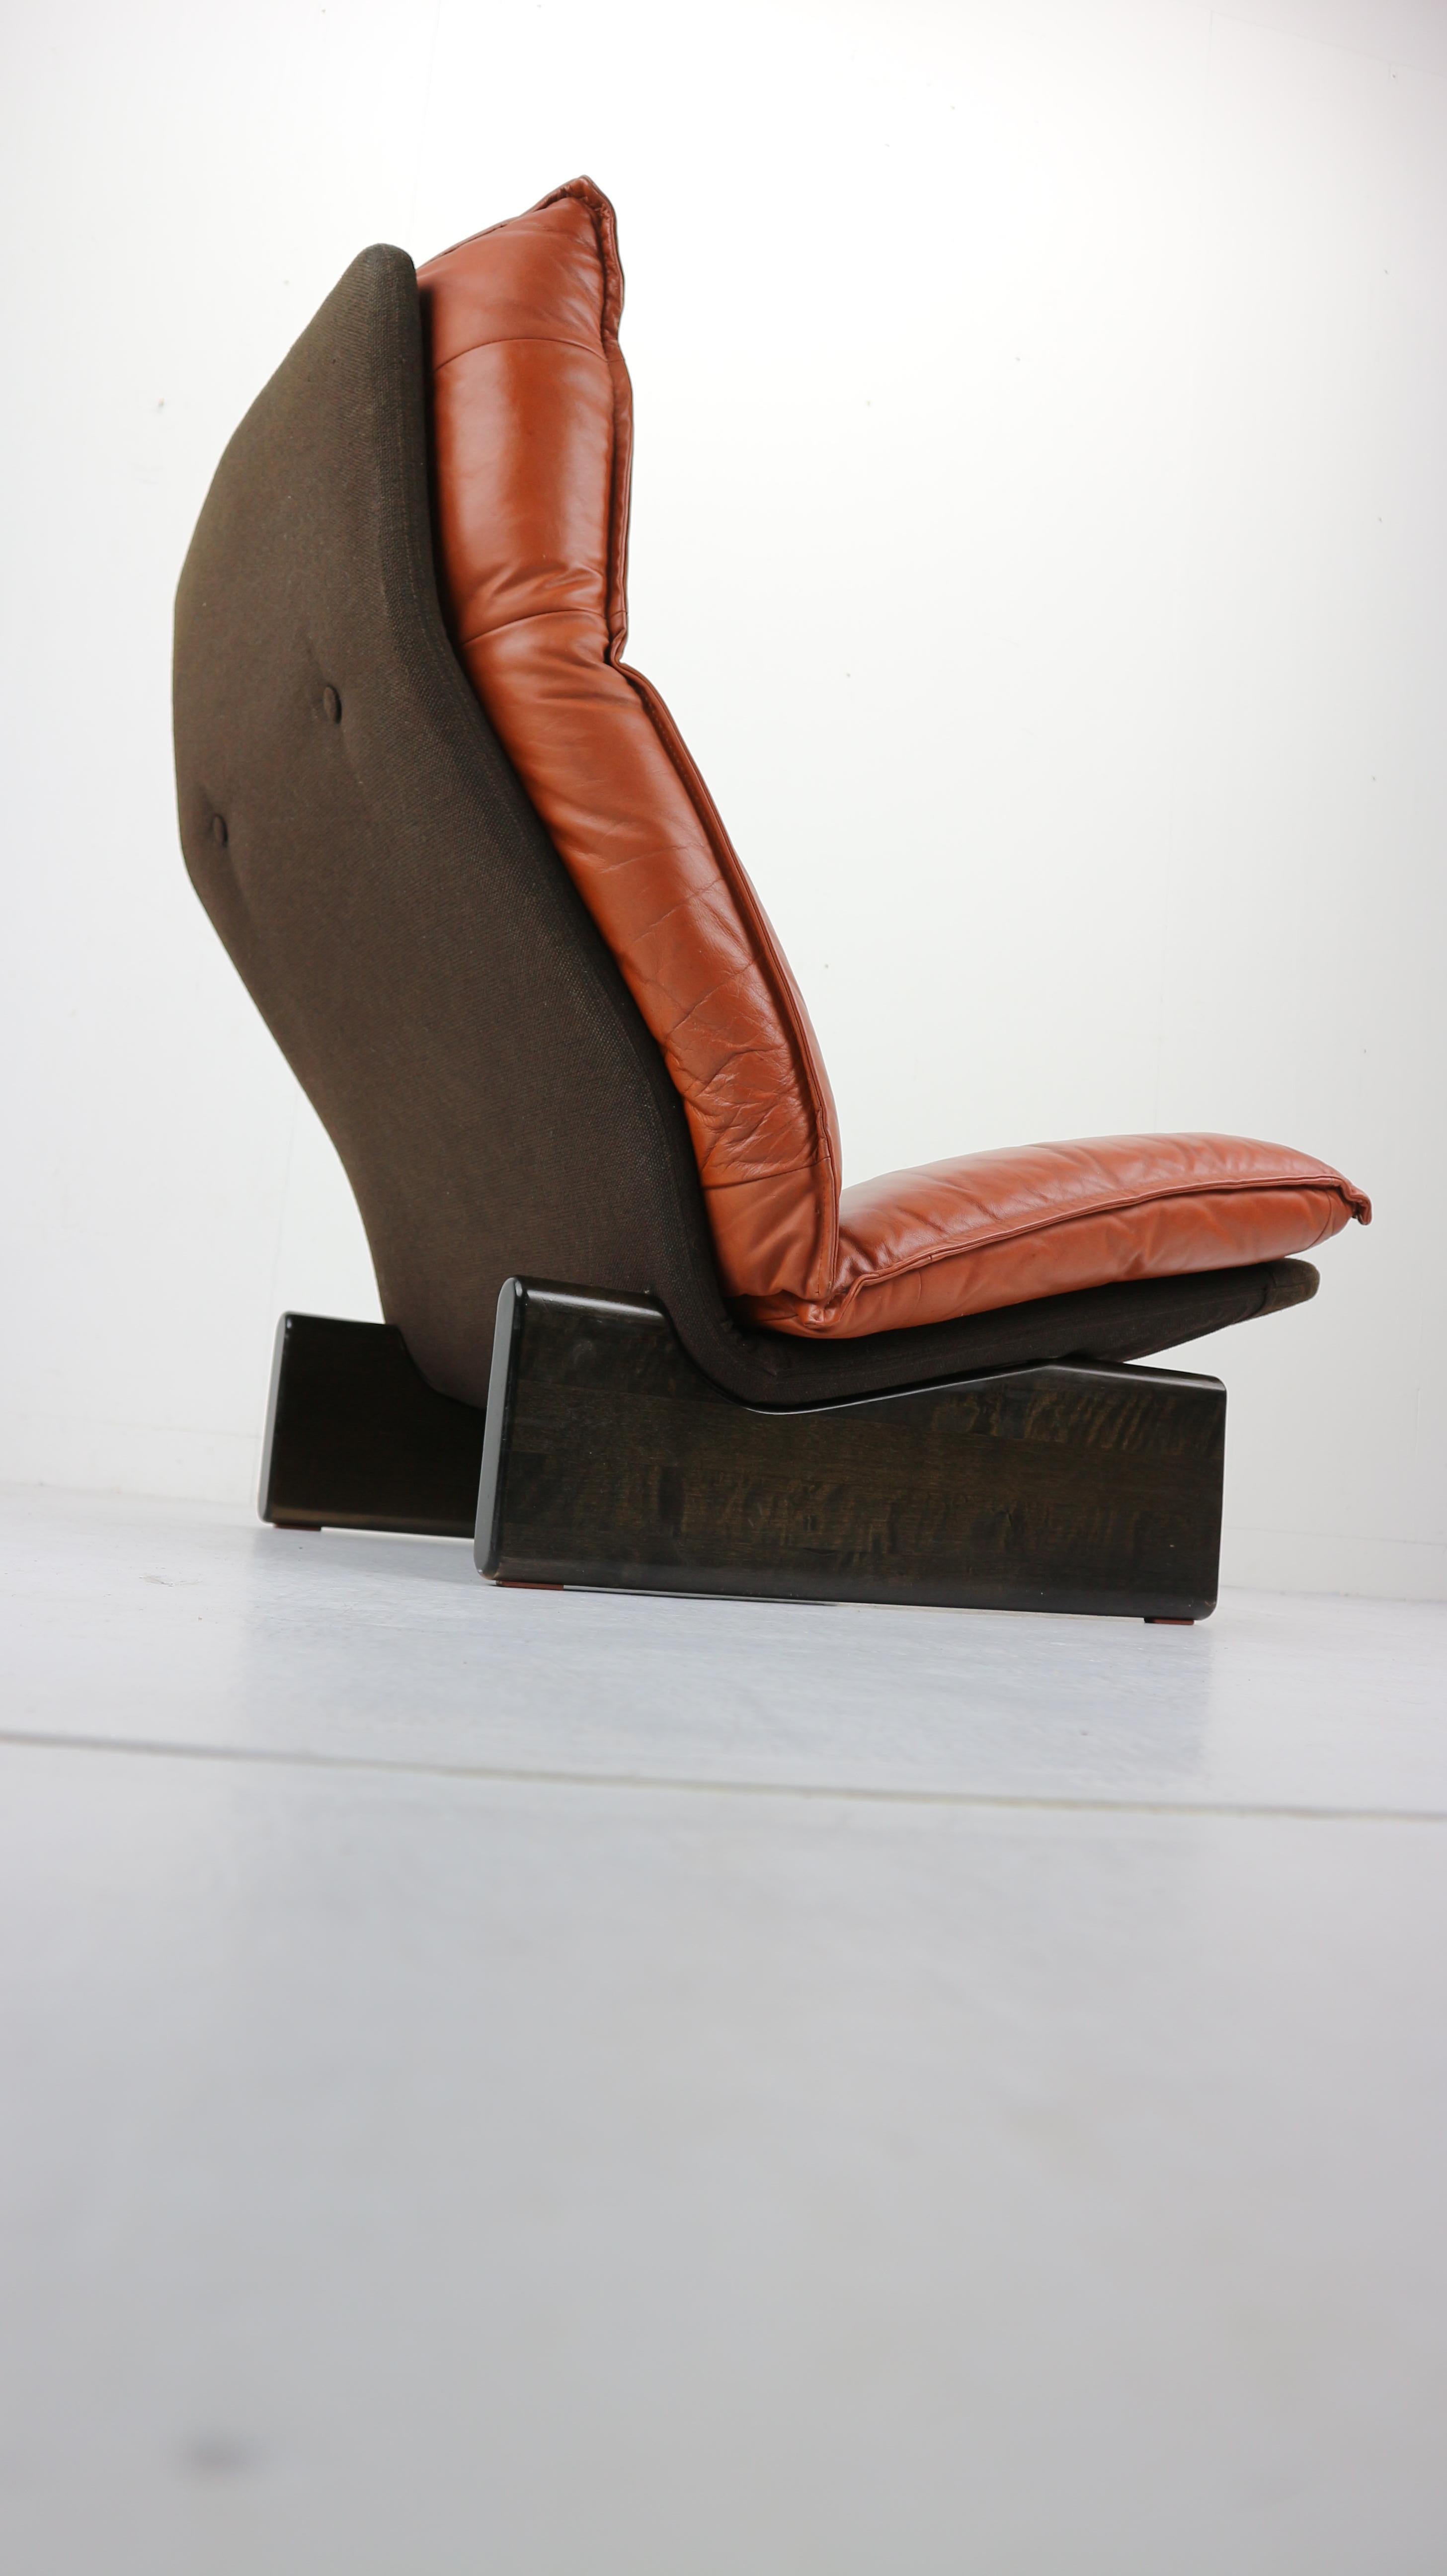 Cognac Leather and Wood Lounge Chair, Dutch Modern Design, 1970s 7